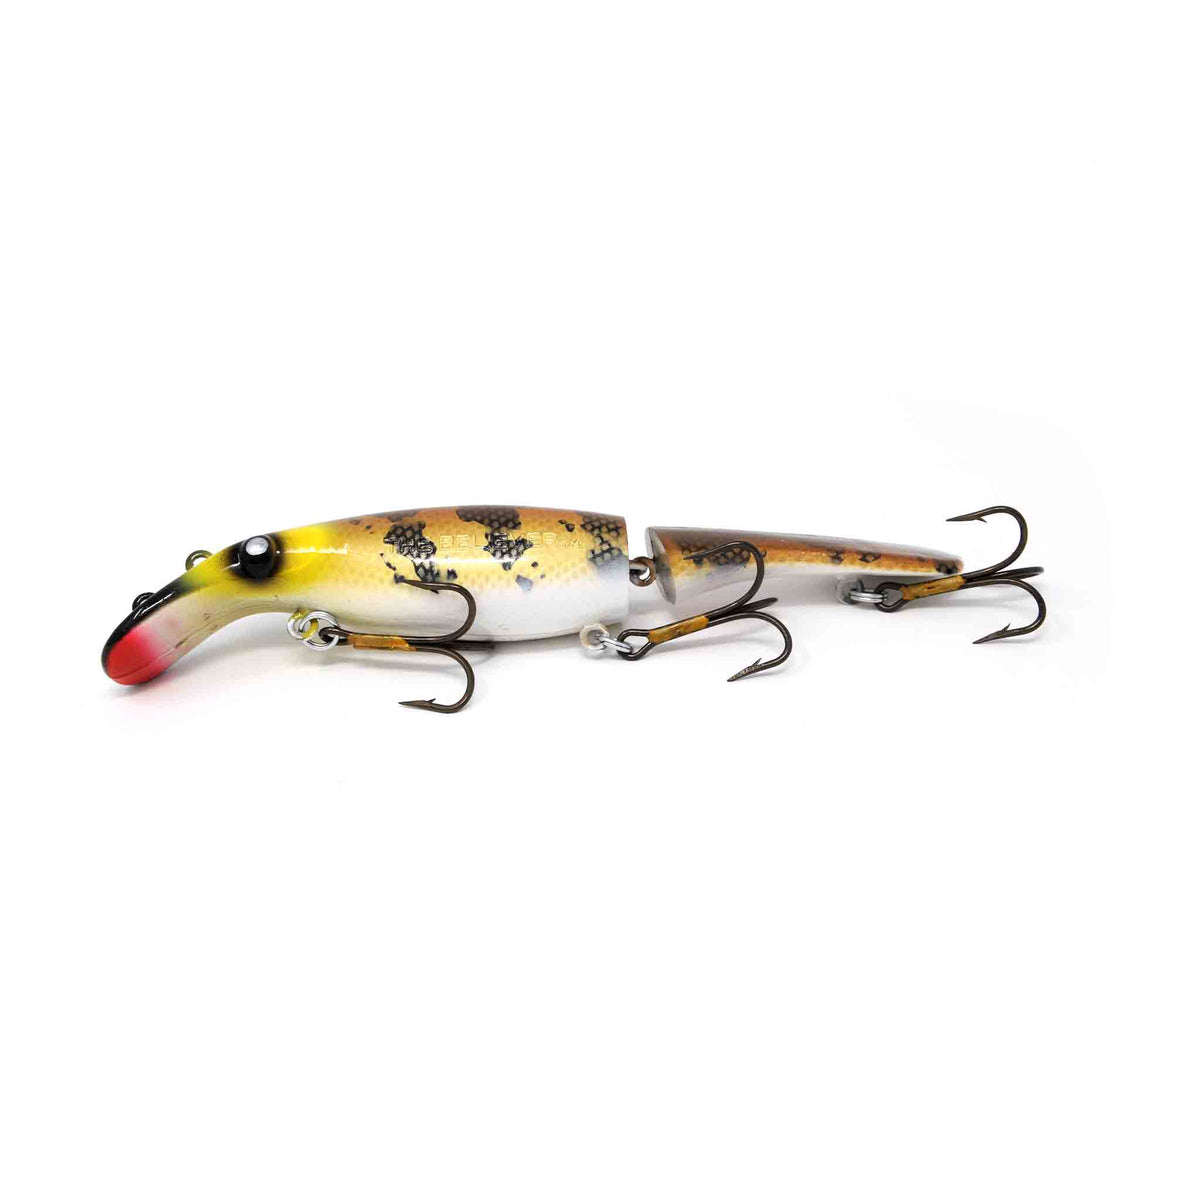 View of Crankbaits Drifter Tackle Believer Jointed 13" Crankbait Natural Walleye available at EZOKO Pike and Musky Shop